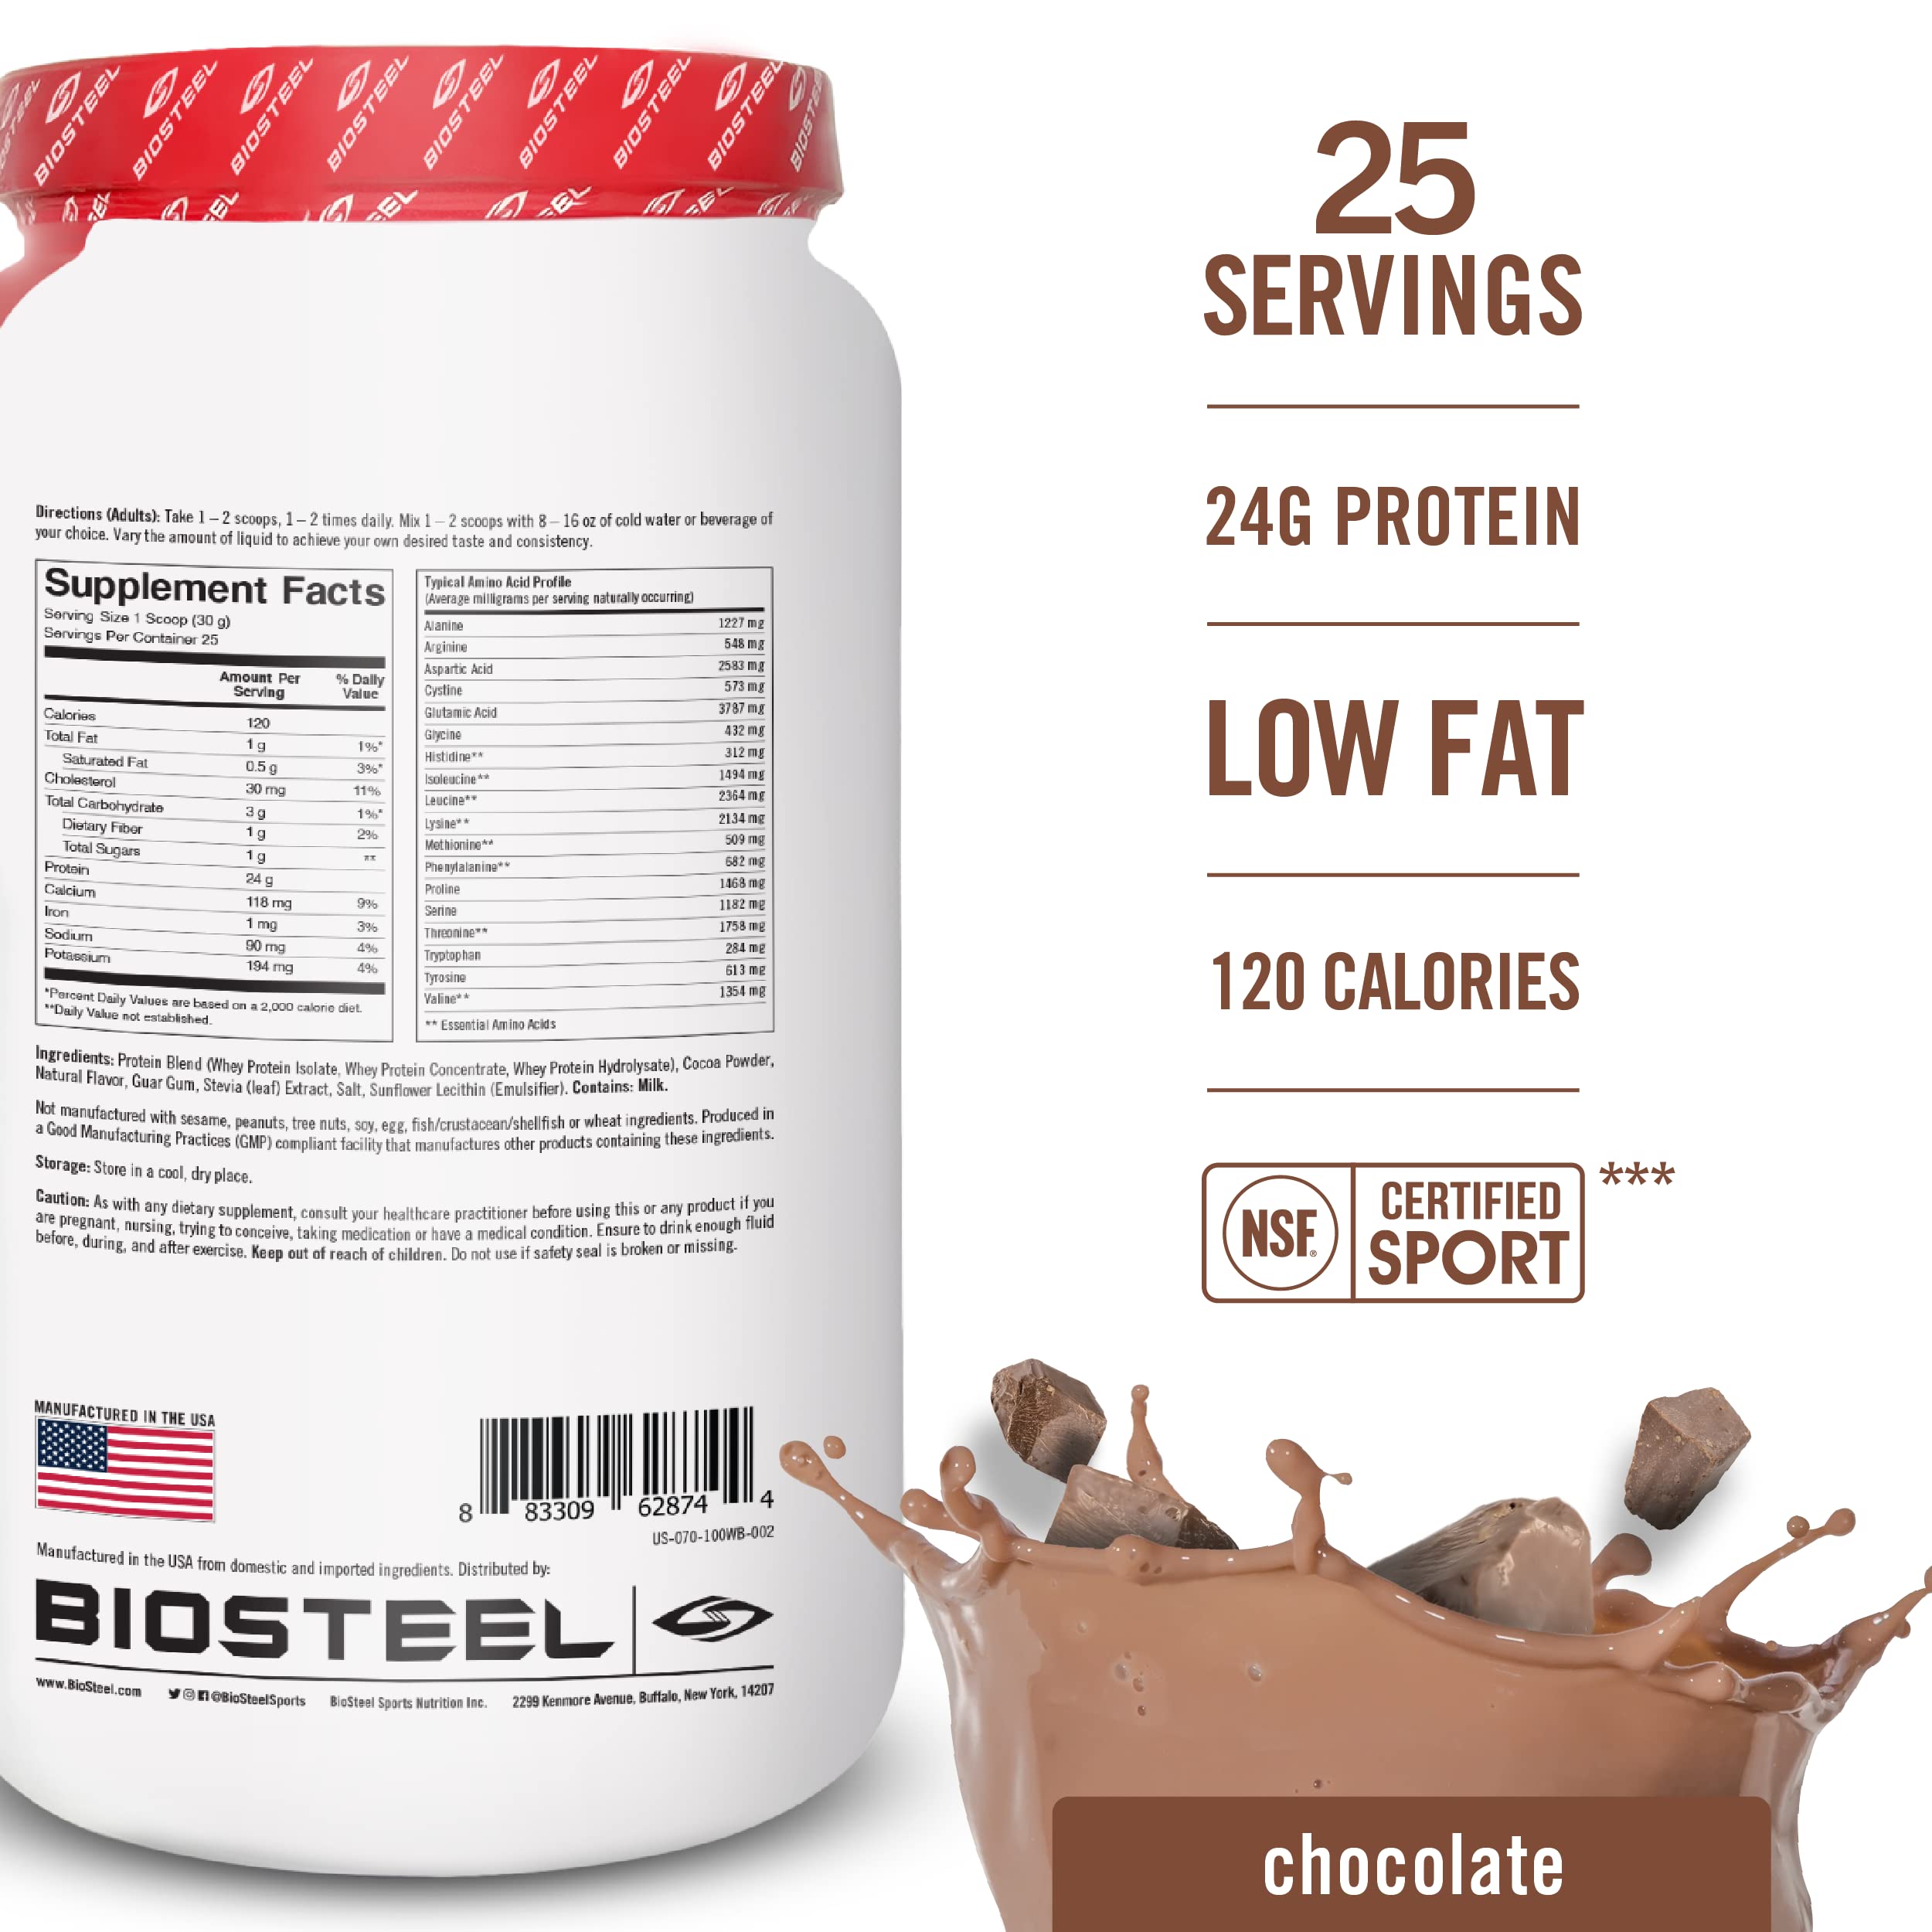 BioSteel 100% Whey Protein Powder, rBGH Hormone Free and Non-GMO Post Workout Formula, Chocolate, 25 Servings